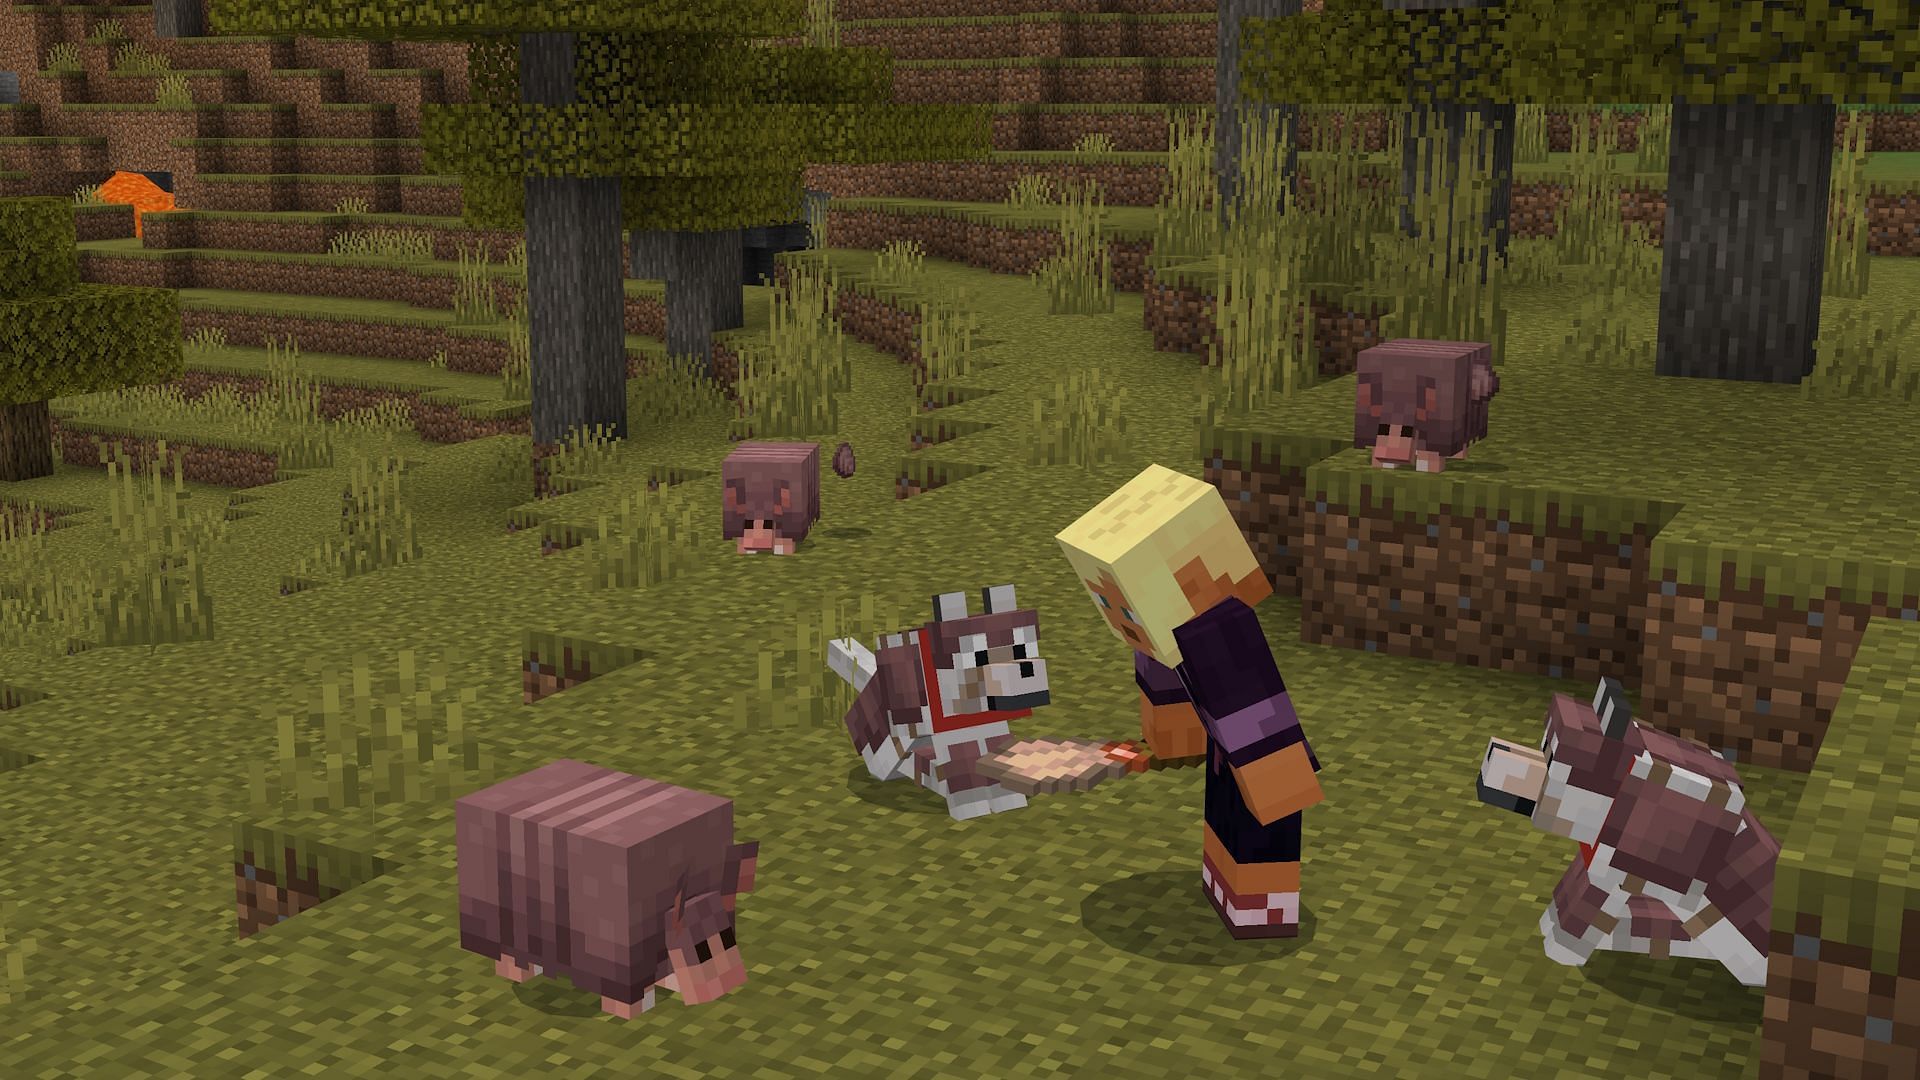 Minecraft armadillo guide: How to find, breeding, uses, and more